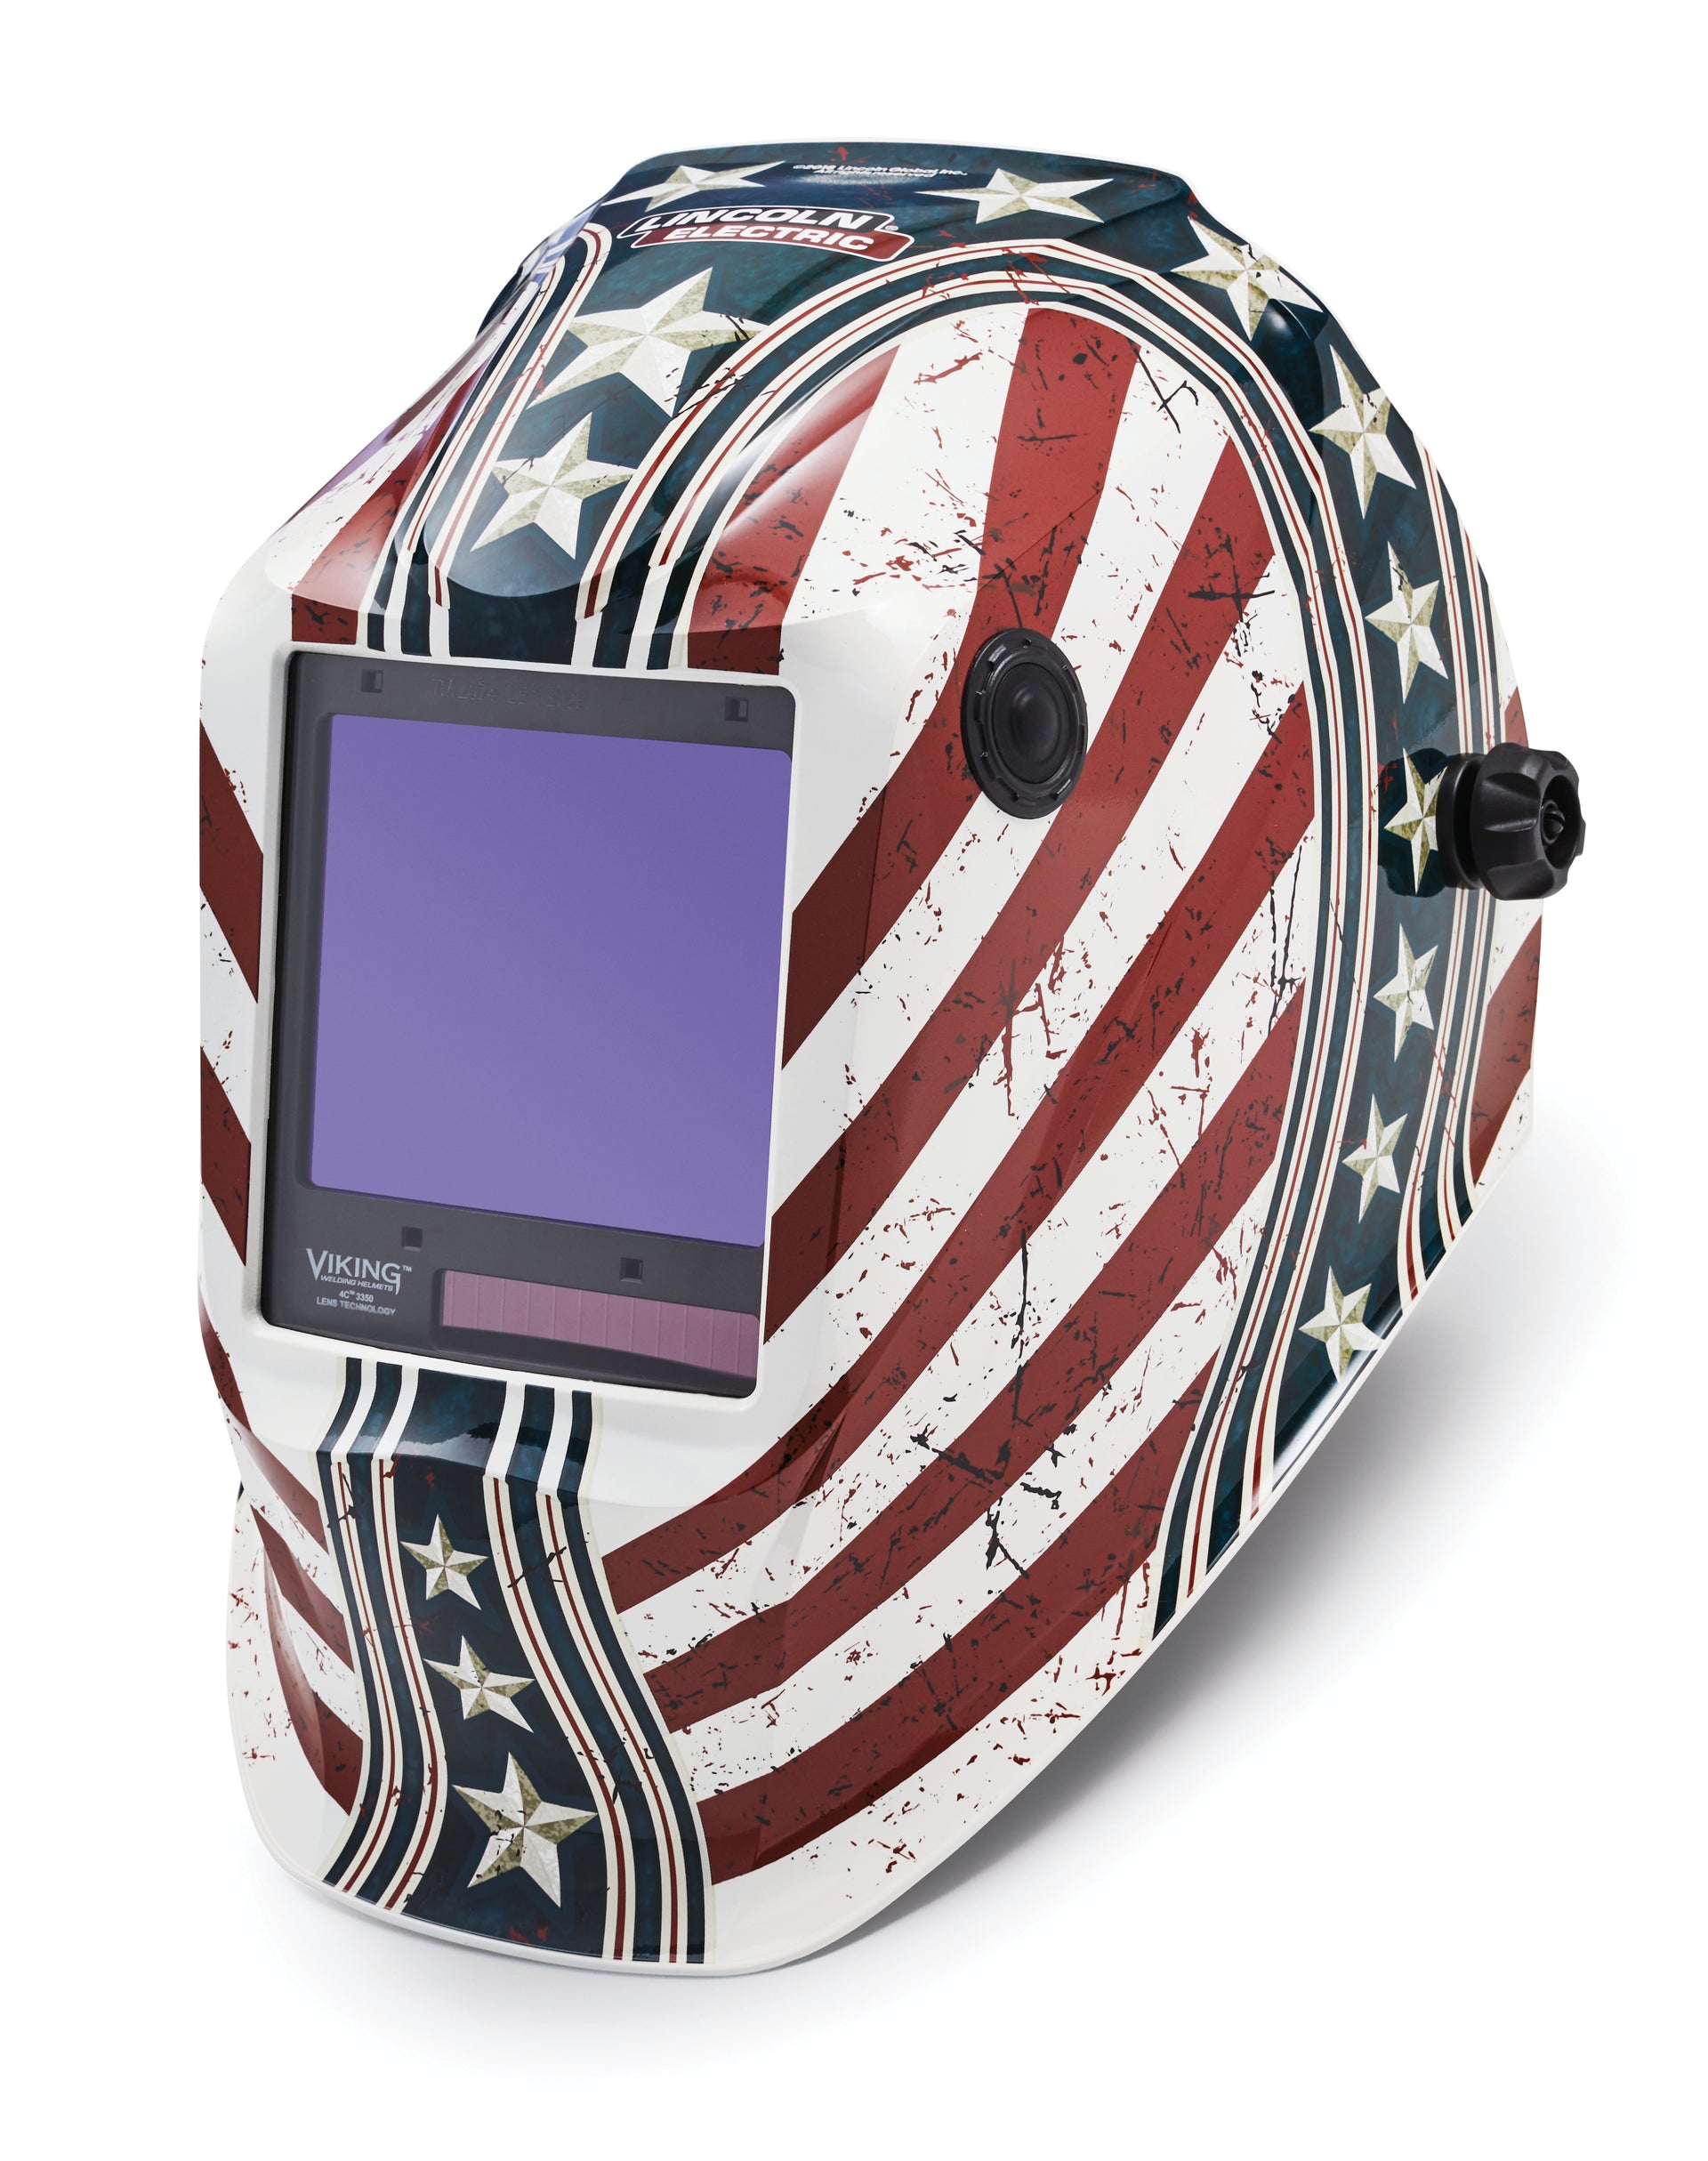 Load video: The New Lincoln Electric Viking 3350 and 2450 Auto-Darkening Welding Helmets.